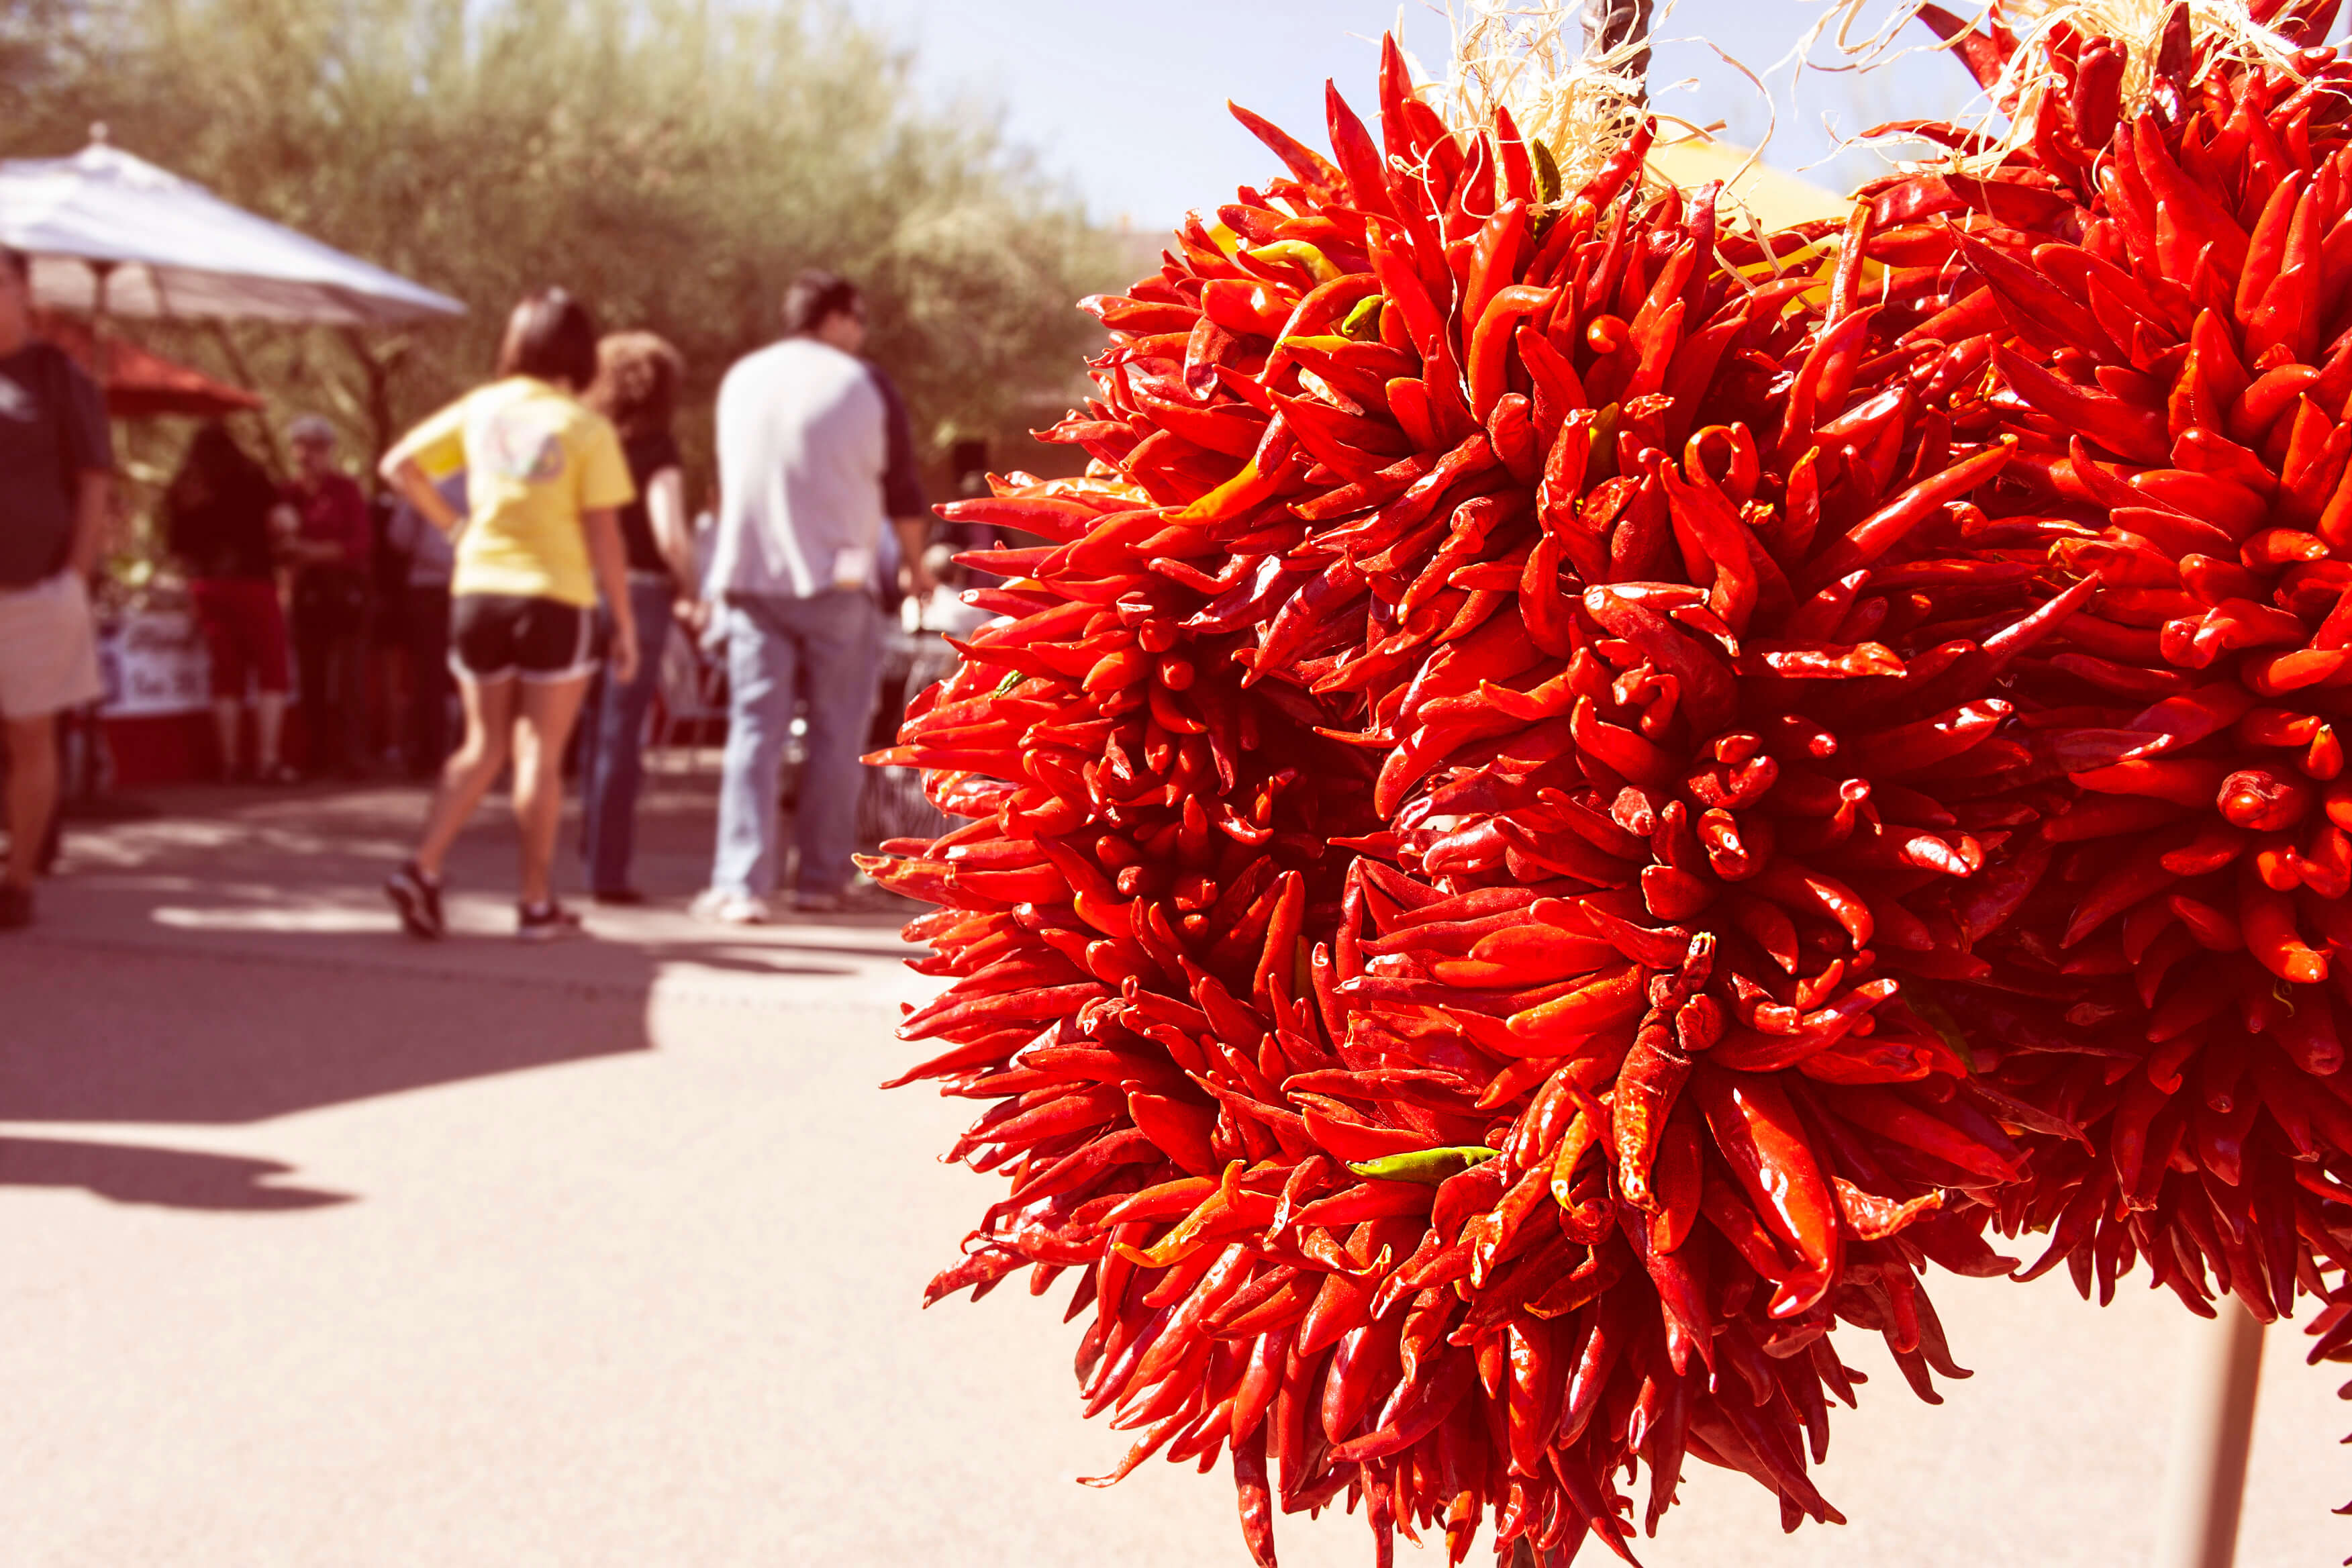 Chile bunch at the Chiles and Chocolate event at the desert botanical gardens